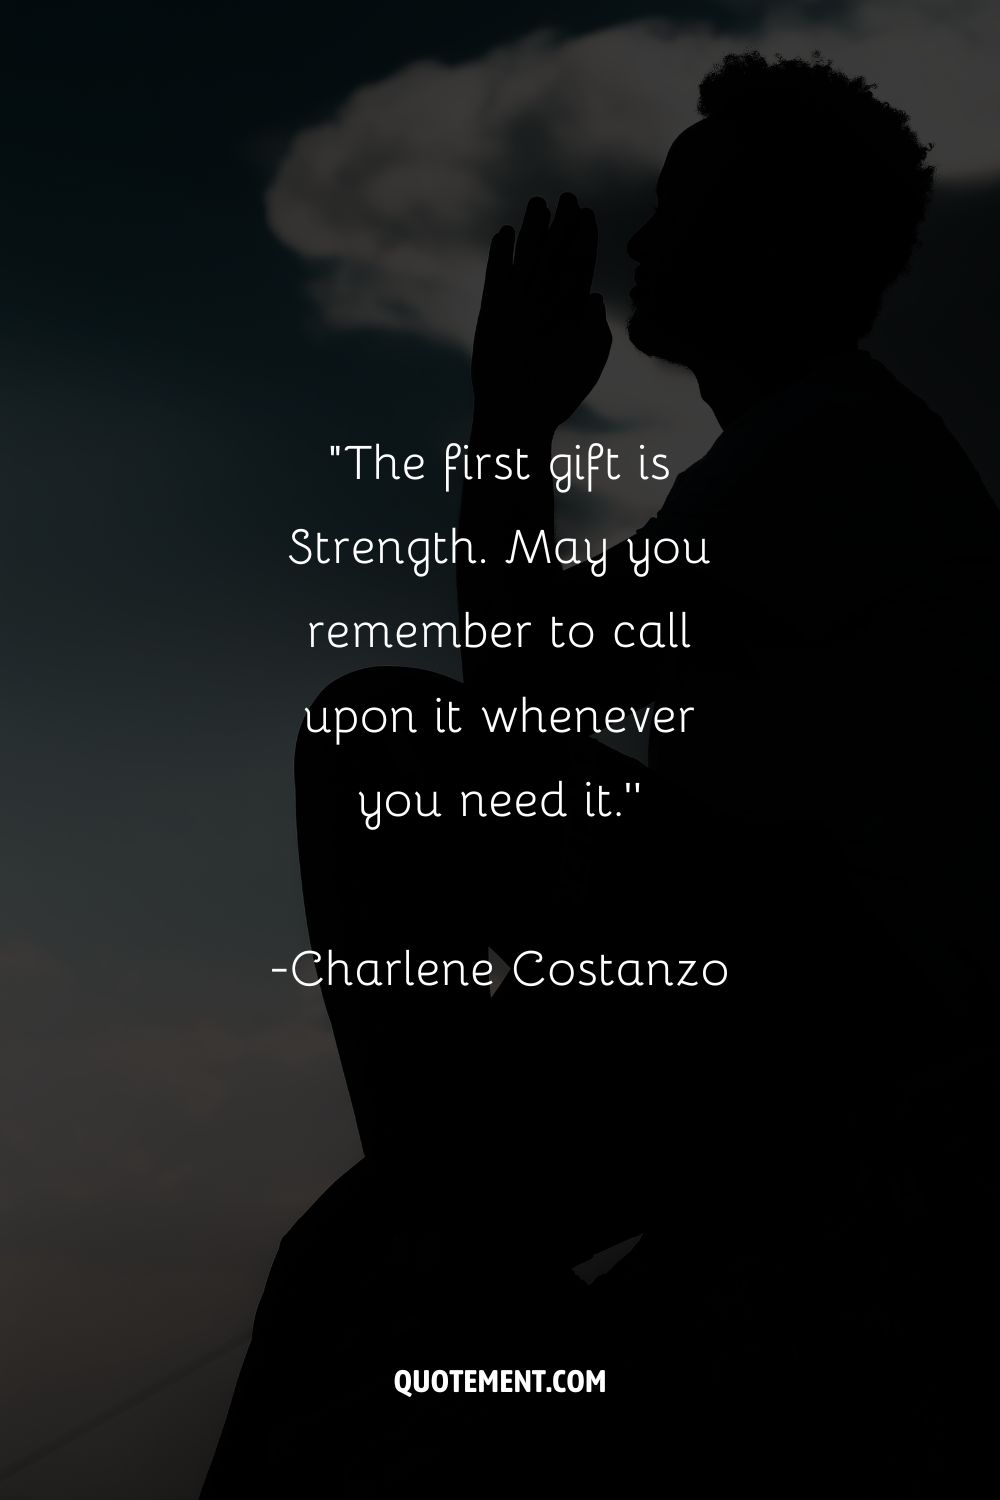 “The first gift is Strength. May you remember to call upon it whenever you need it.”